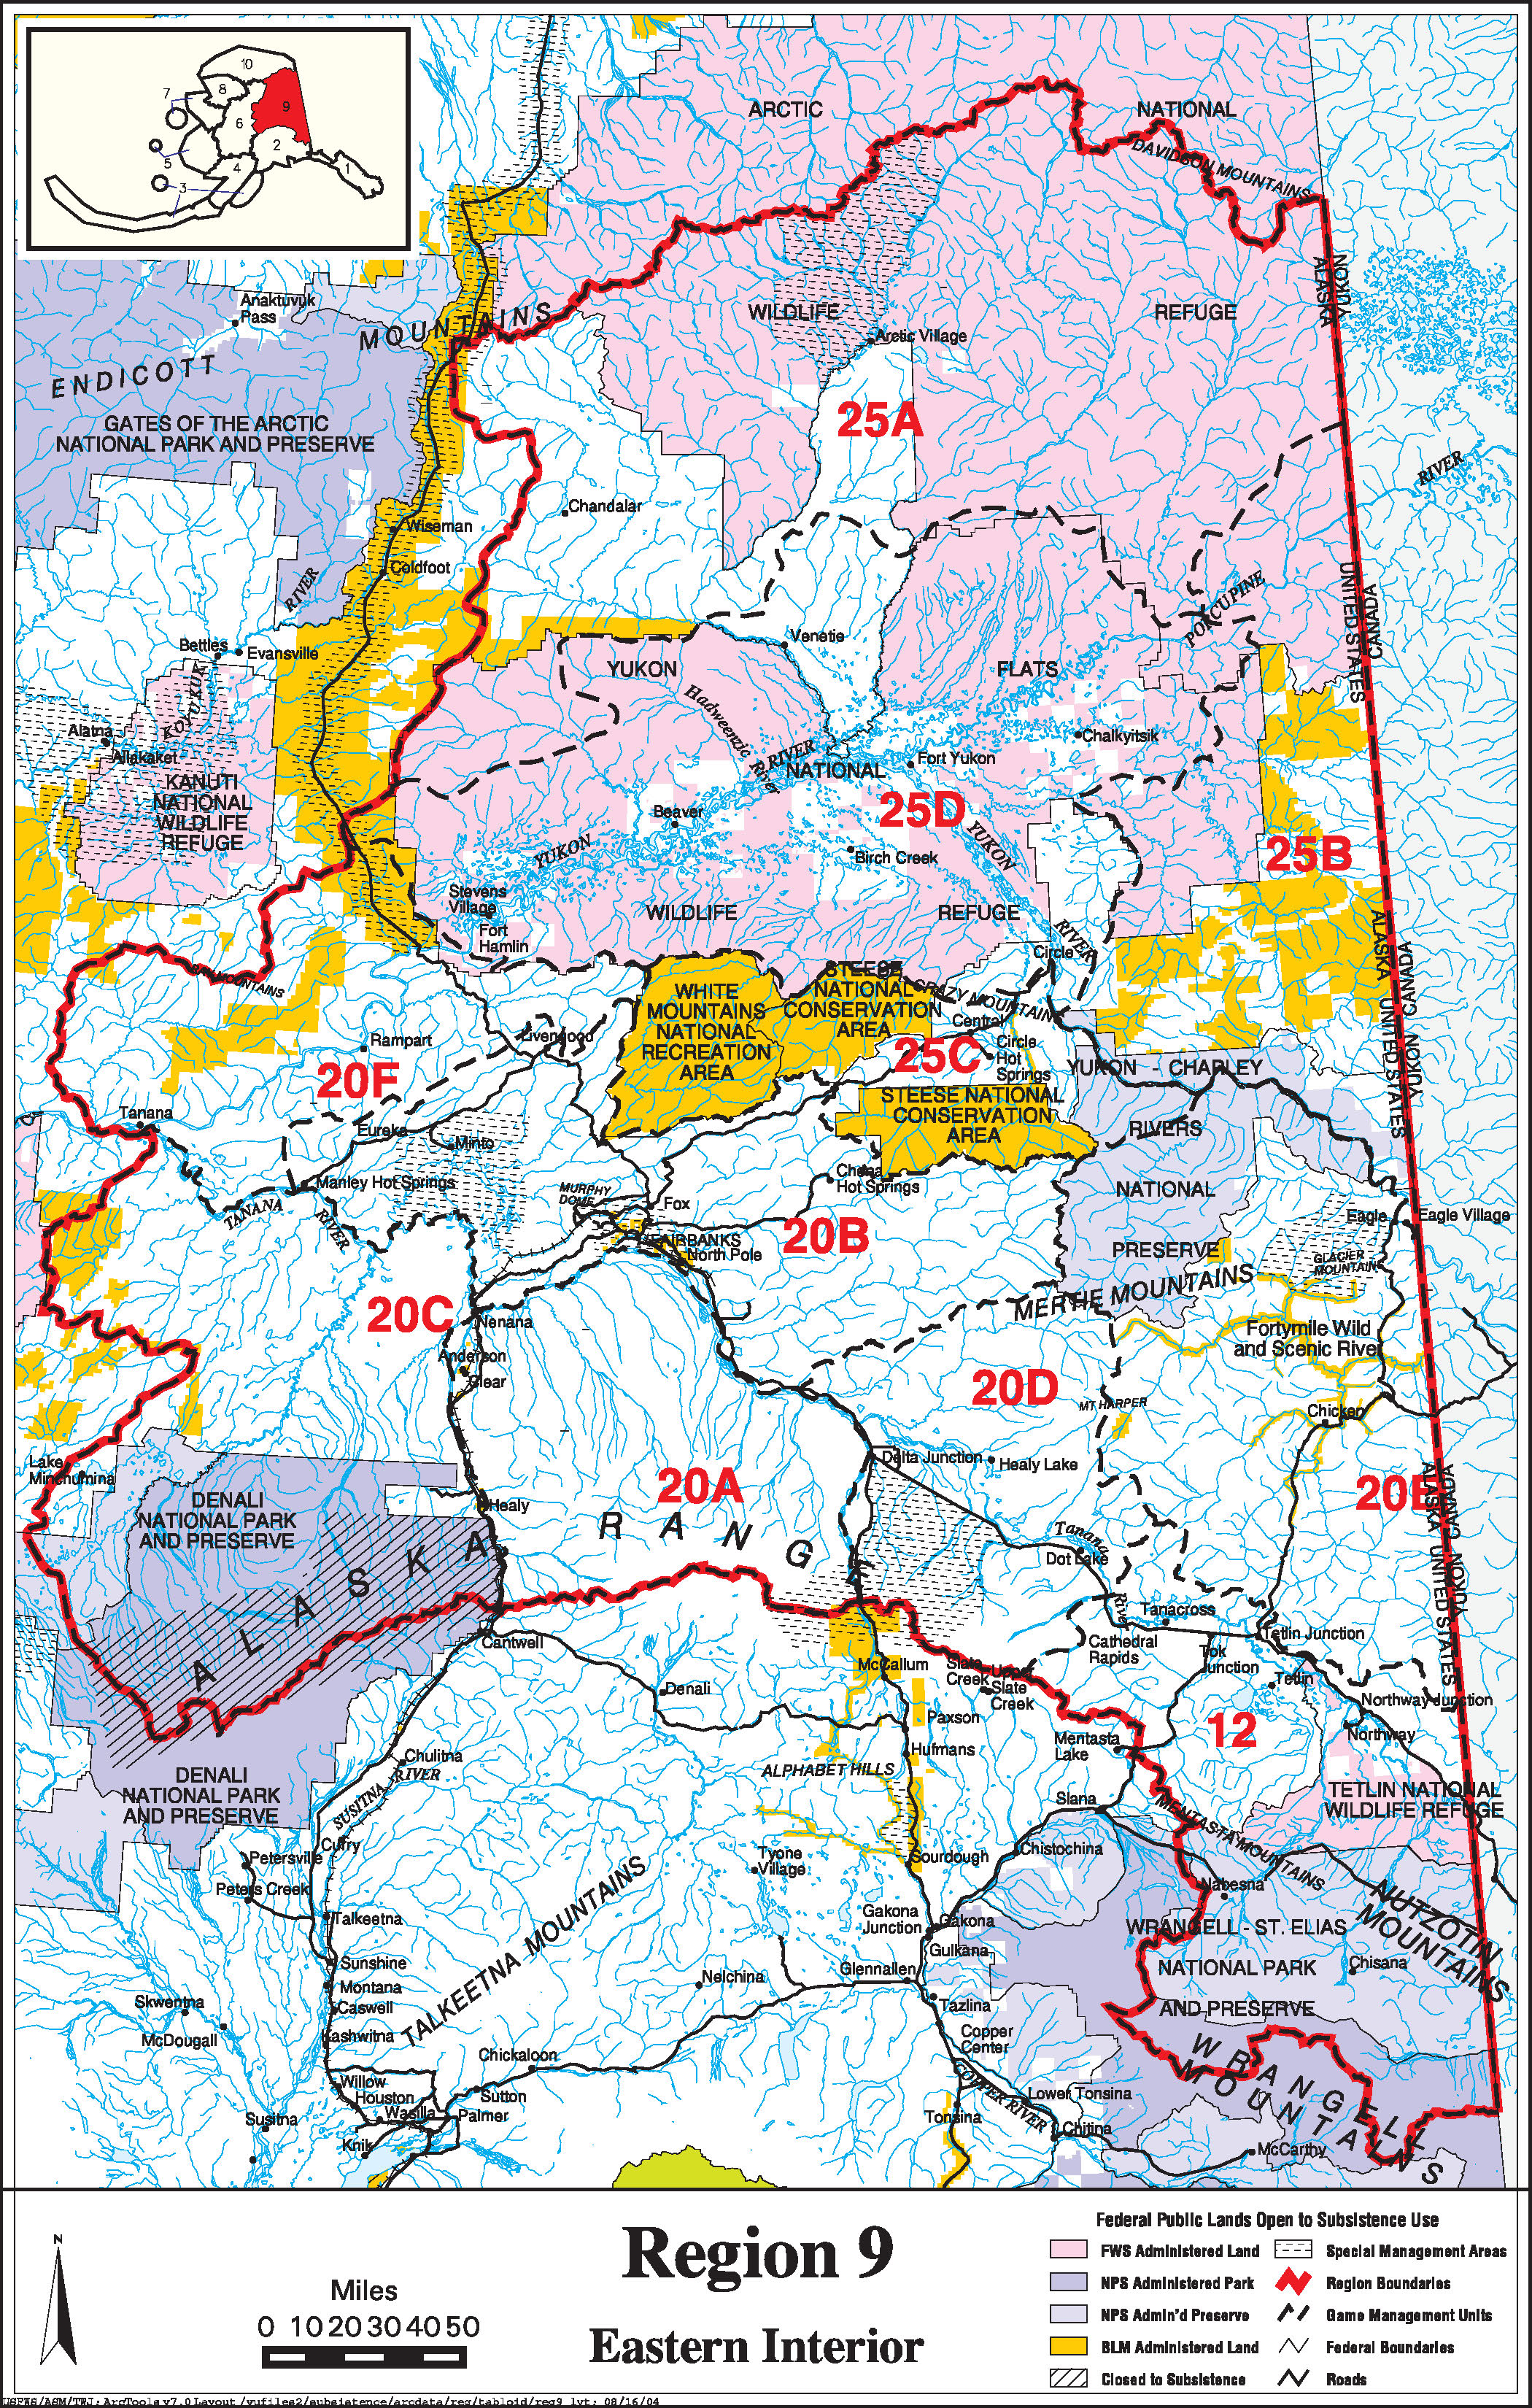 Map showing the boundaries of the Eastern Interior Federal Subsistence Resource Region, including communities listed previously on this page. Federally managed lands are shown, by agency. For assistance call (800) 478-1456.